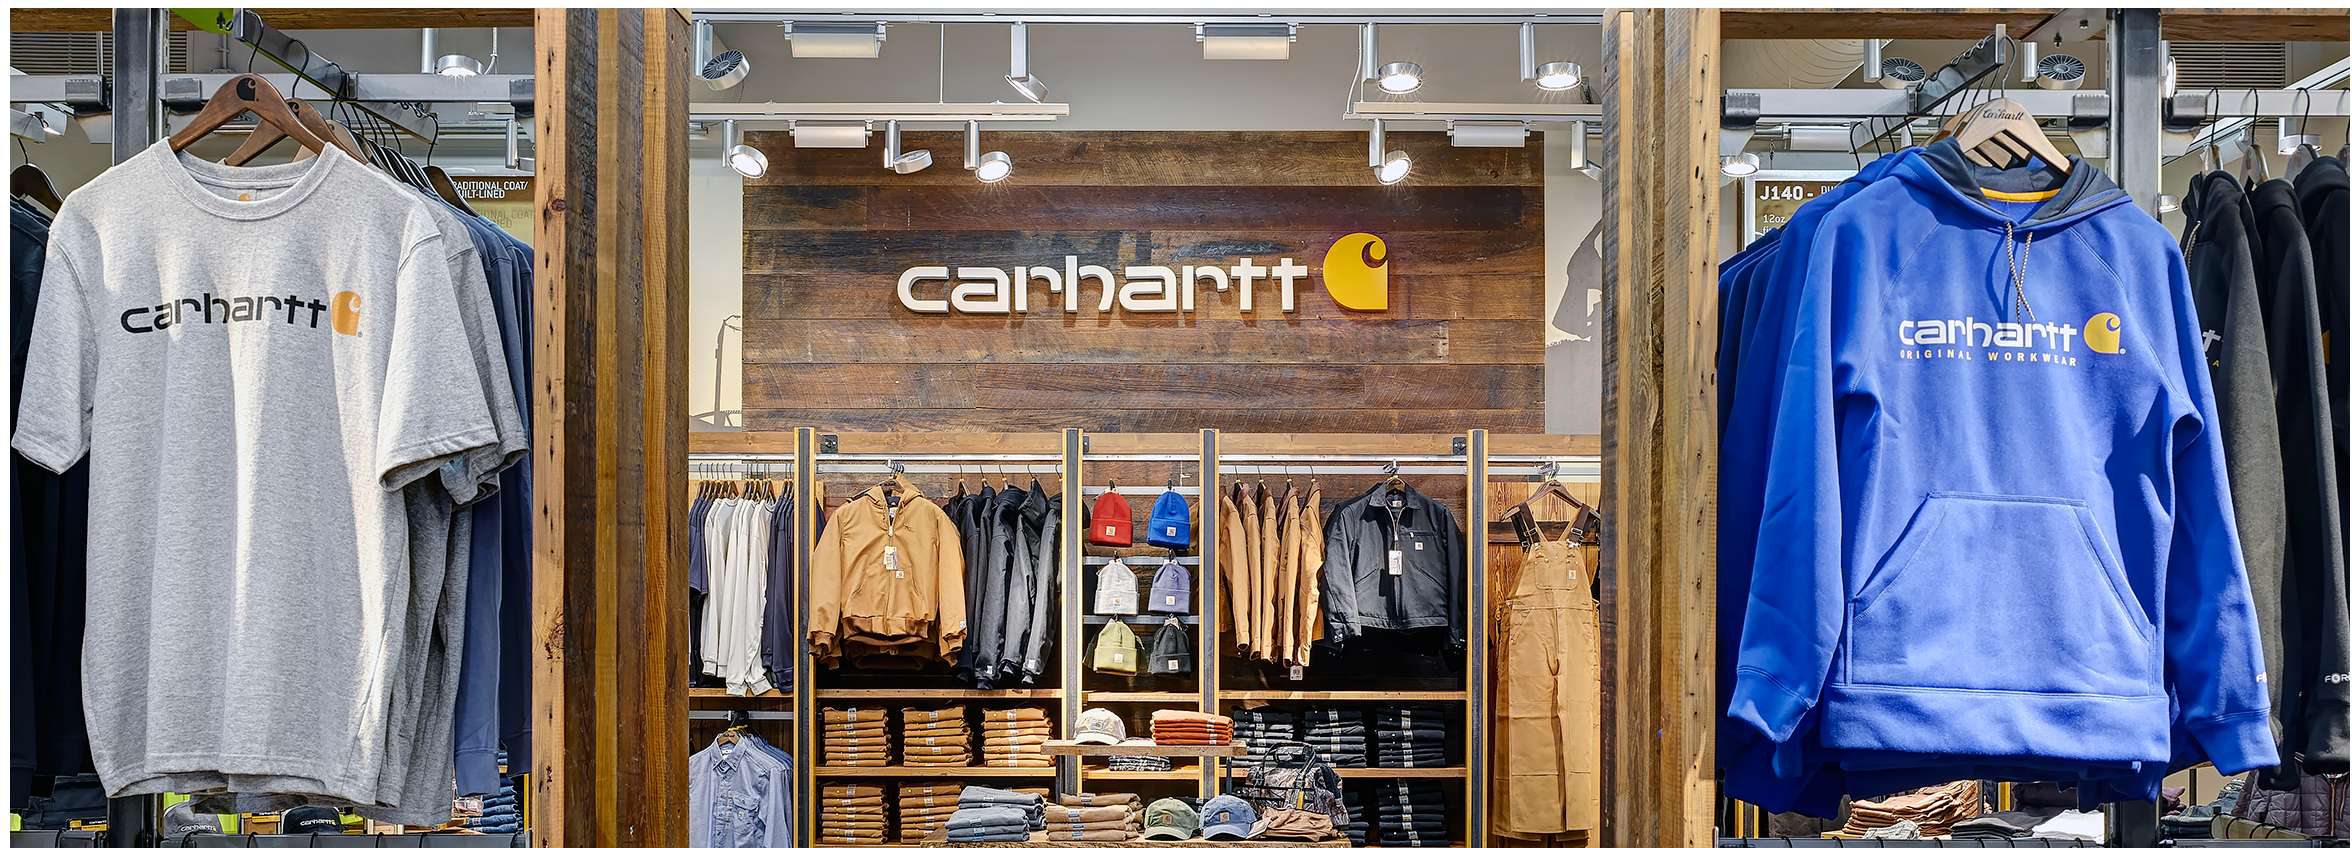 Shop Carhartt. Image description: A brand display of Carhartt clothing. In the foreground are display racks. On the left is a grey tee shirt with the Carhartt logo on the chest. On the right is a royal blue hooded sweatshirt with the Carhartt logo. In the background is a rustic wood wall with the Carhartt logo on a large sign over more displays of Carhartt work jackets, overalls, beanies, hats, and pants